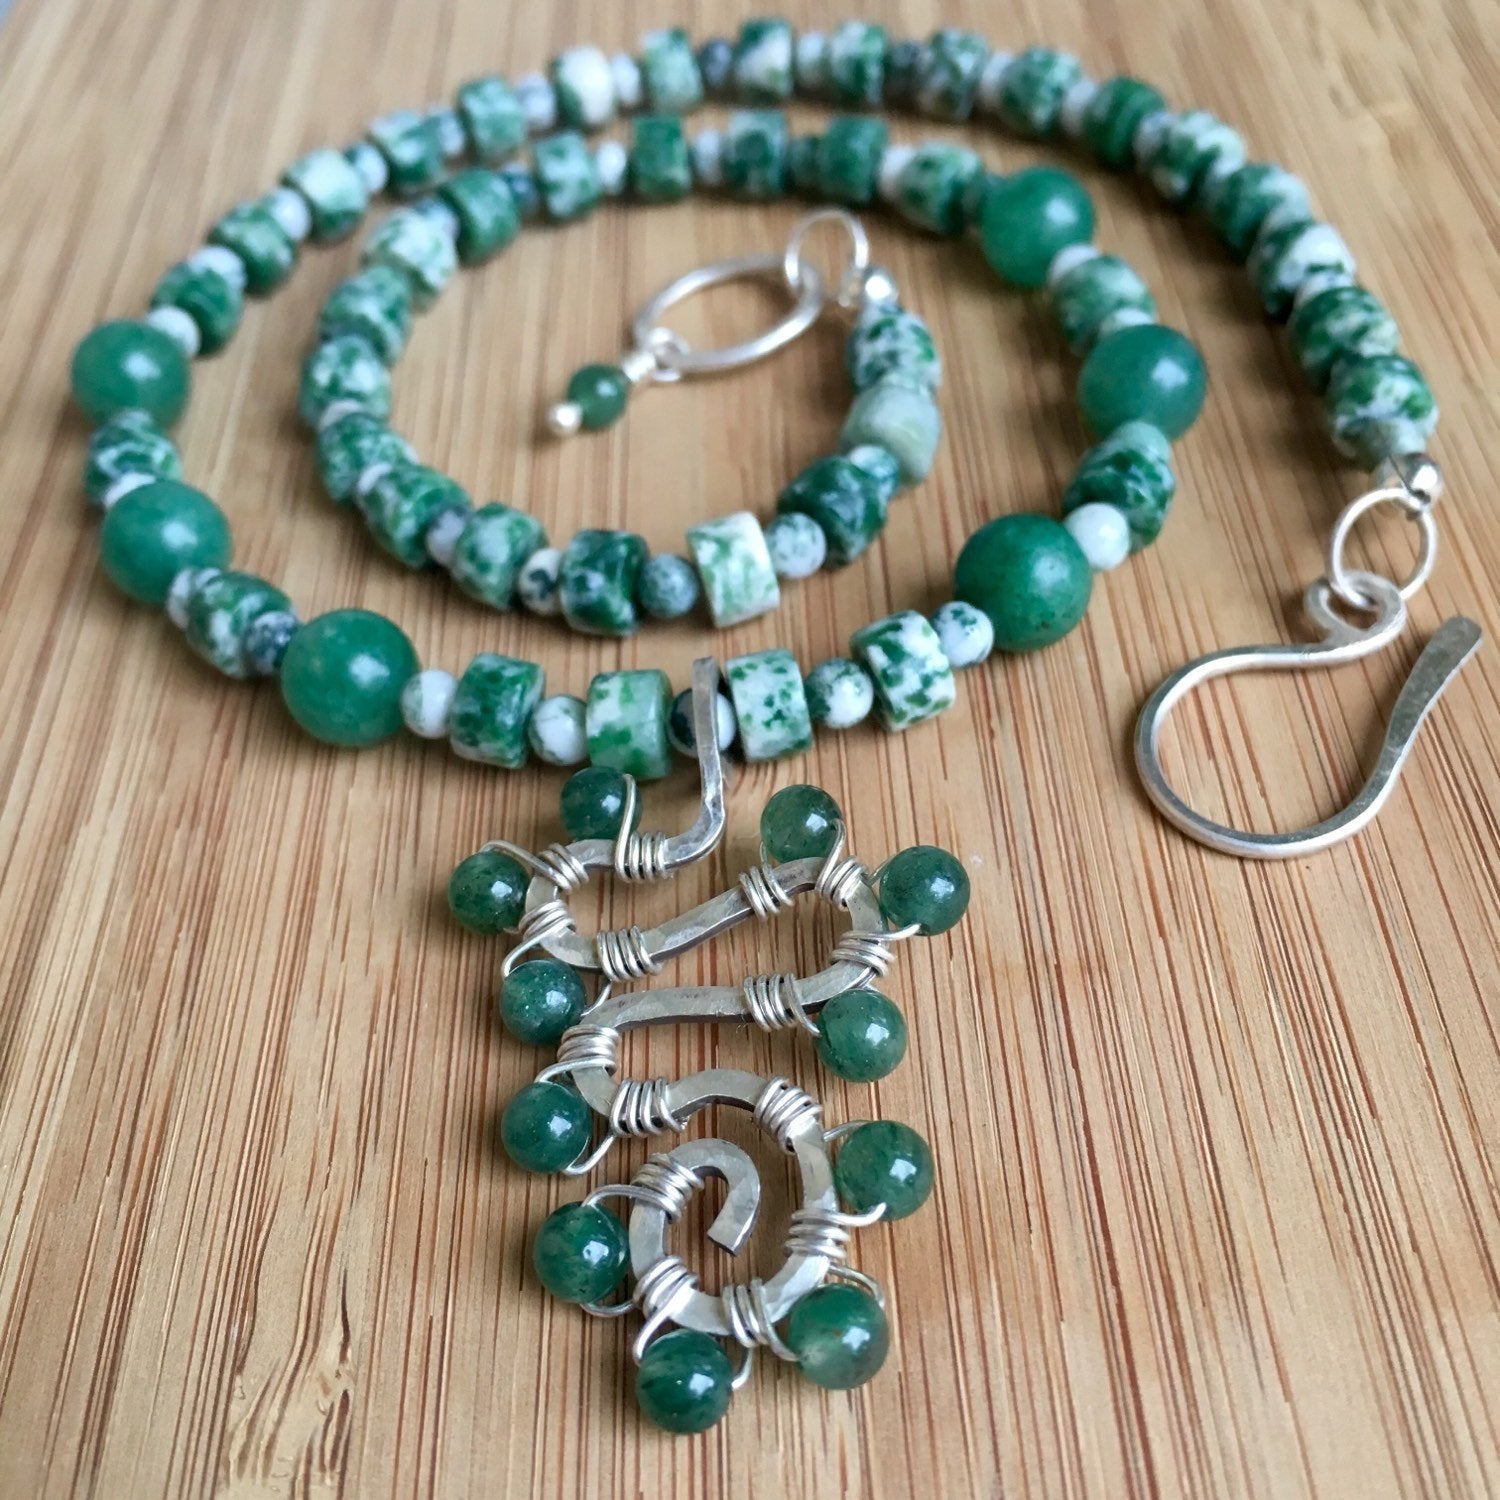 Aventurine Gemstone Necklace with Sterling Silver Details - MADE TO ORDER -